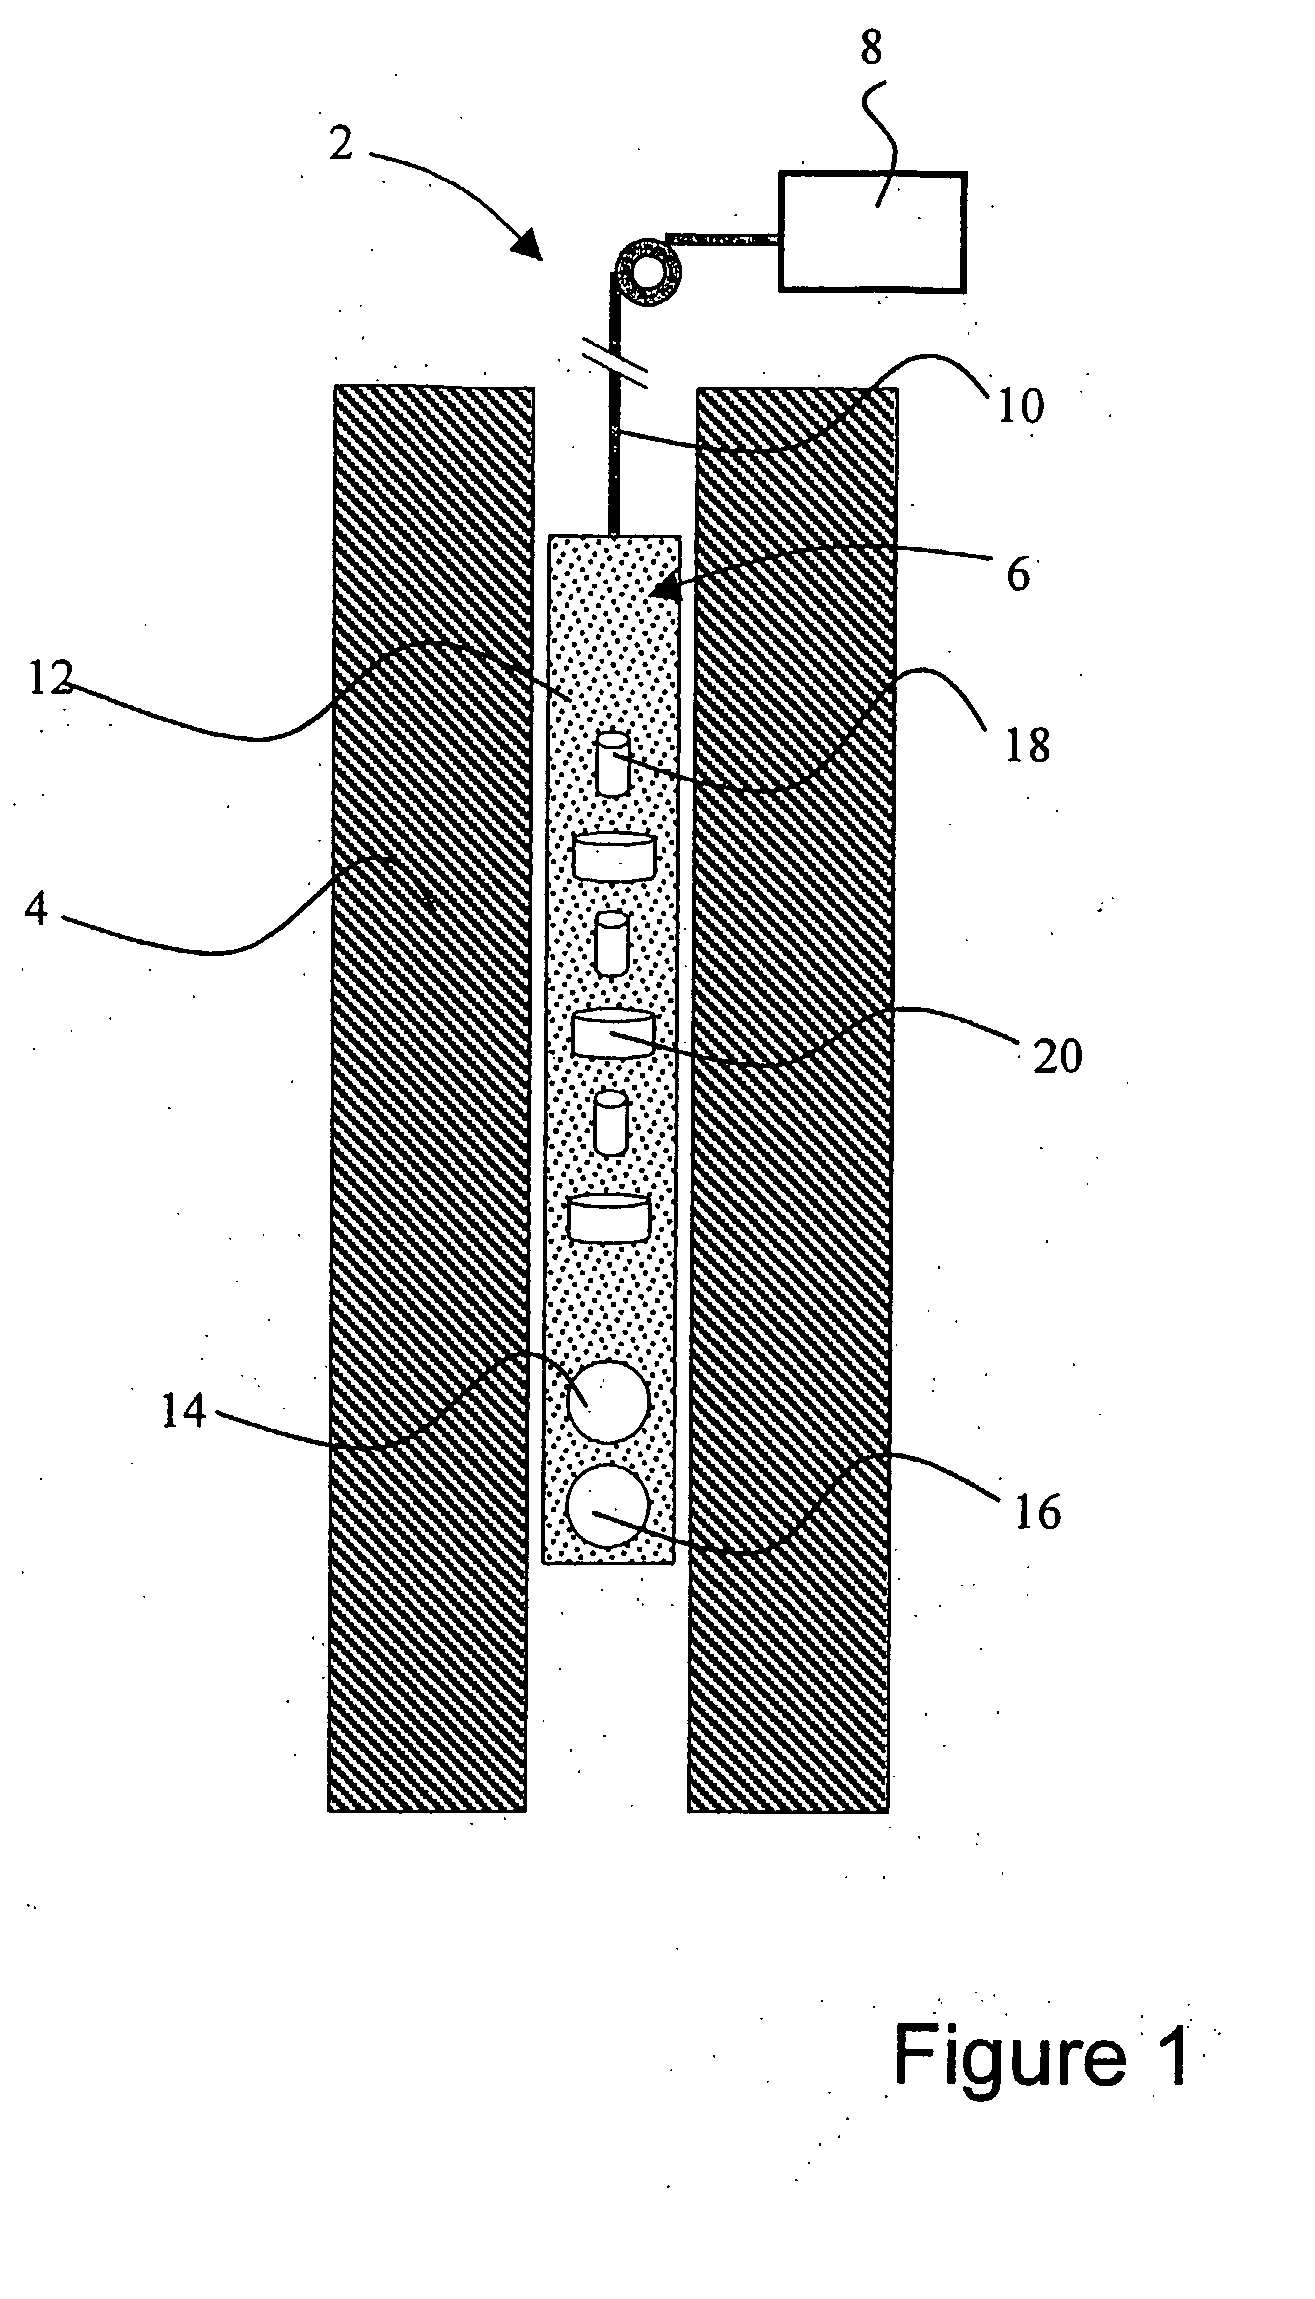 Method and Apparatus for Determining the Permeability of Earth Formations